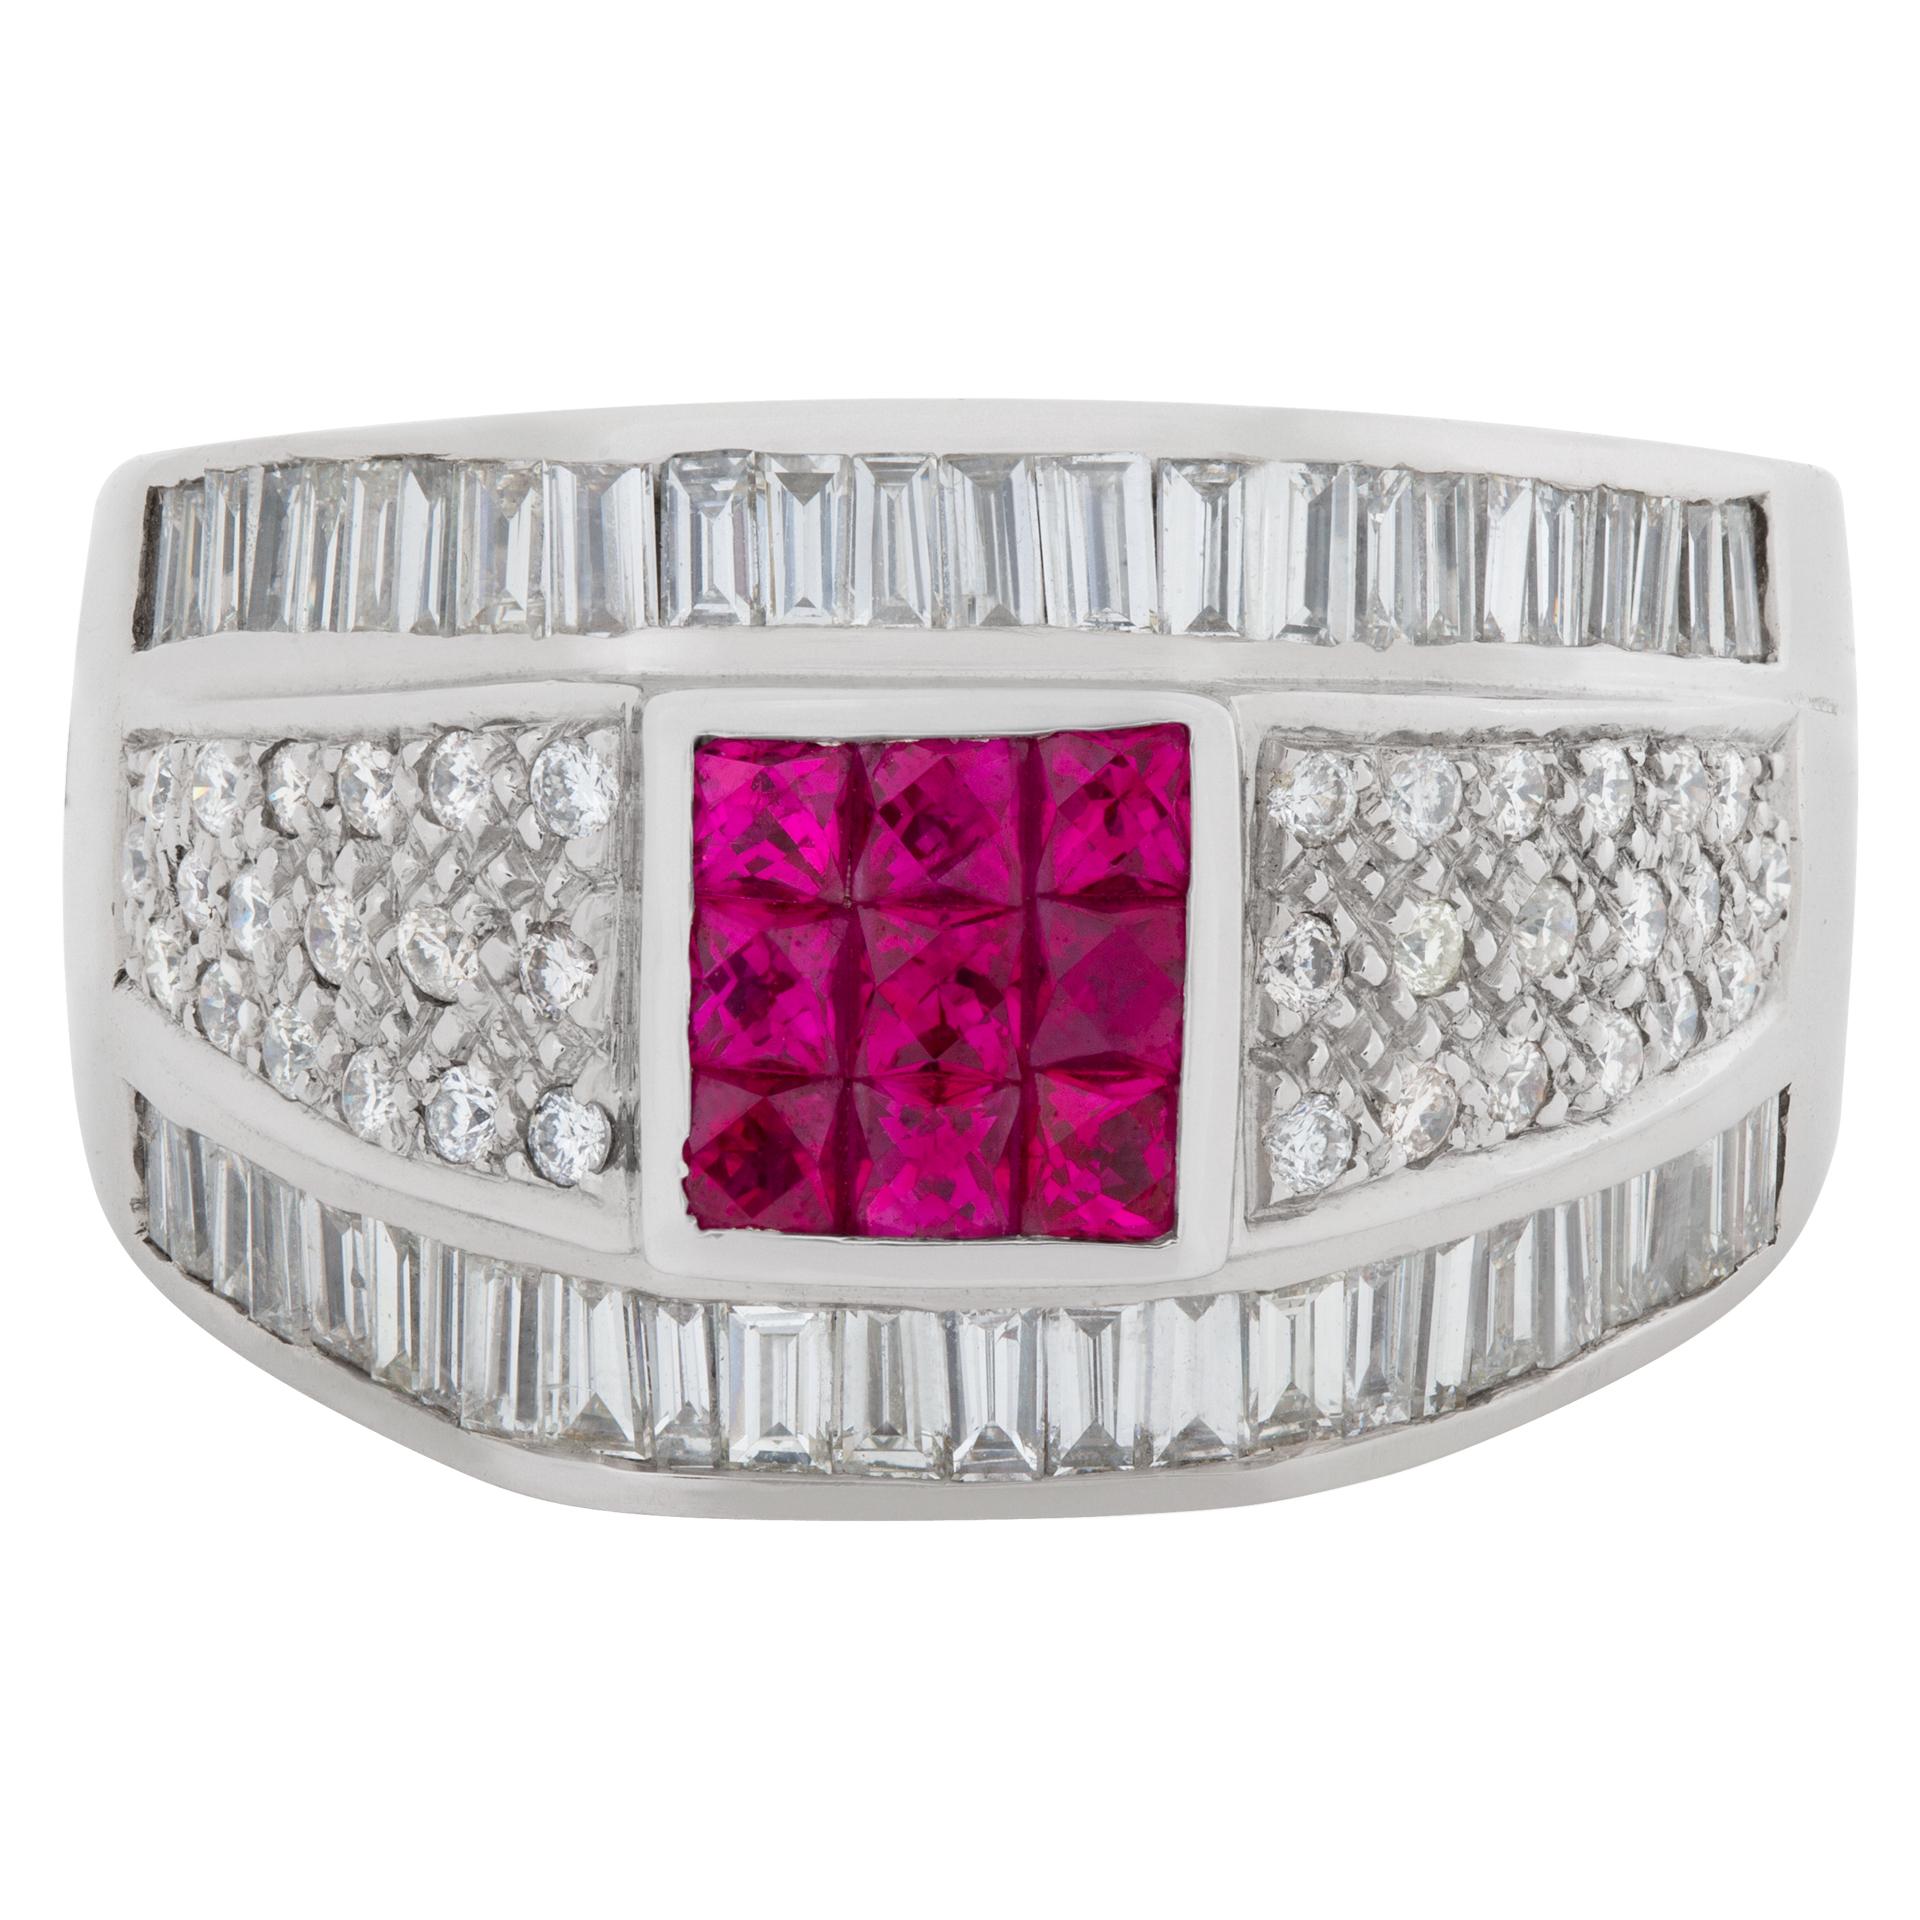 Fancy ruby and diamond ring with over 1carat in baguette and pave round diamonds in 18k white gold. Size 8.5.

This Diamond ring is currently size 8.5 and some items can be sized up or down, please ask! It weighs 7.7 pennyweights and is 18k.